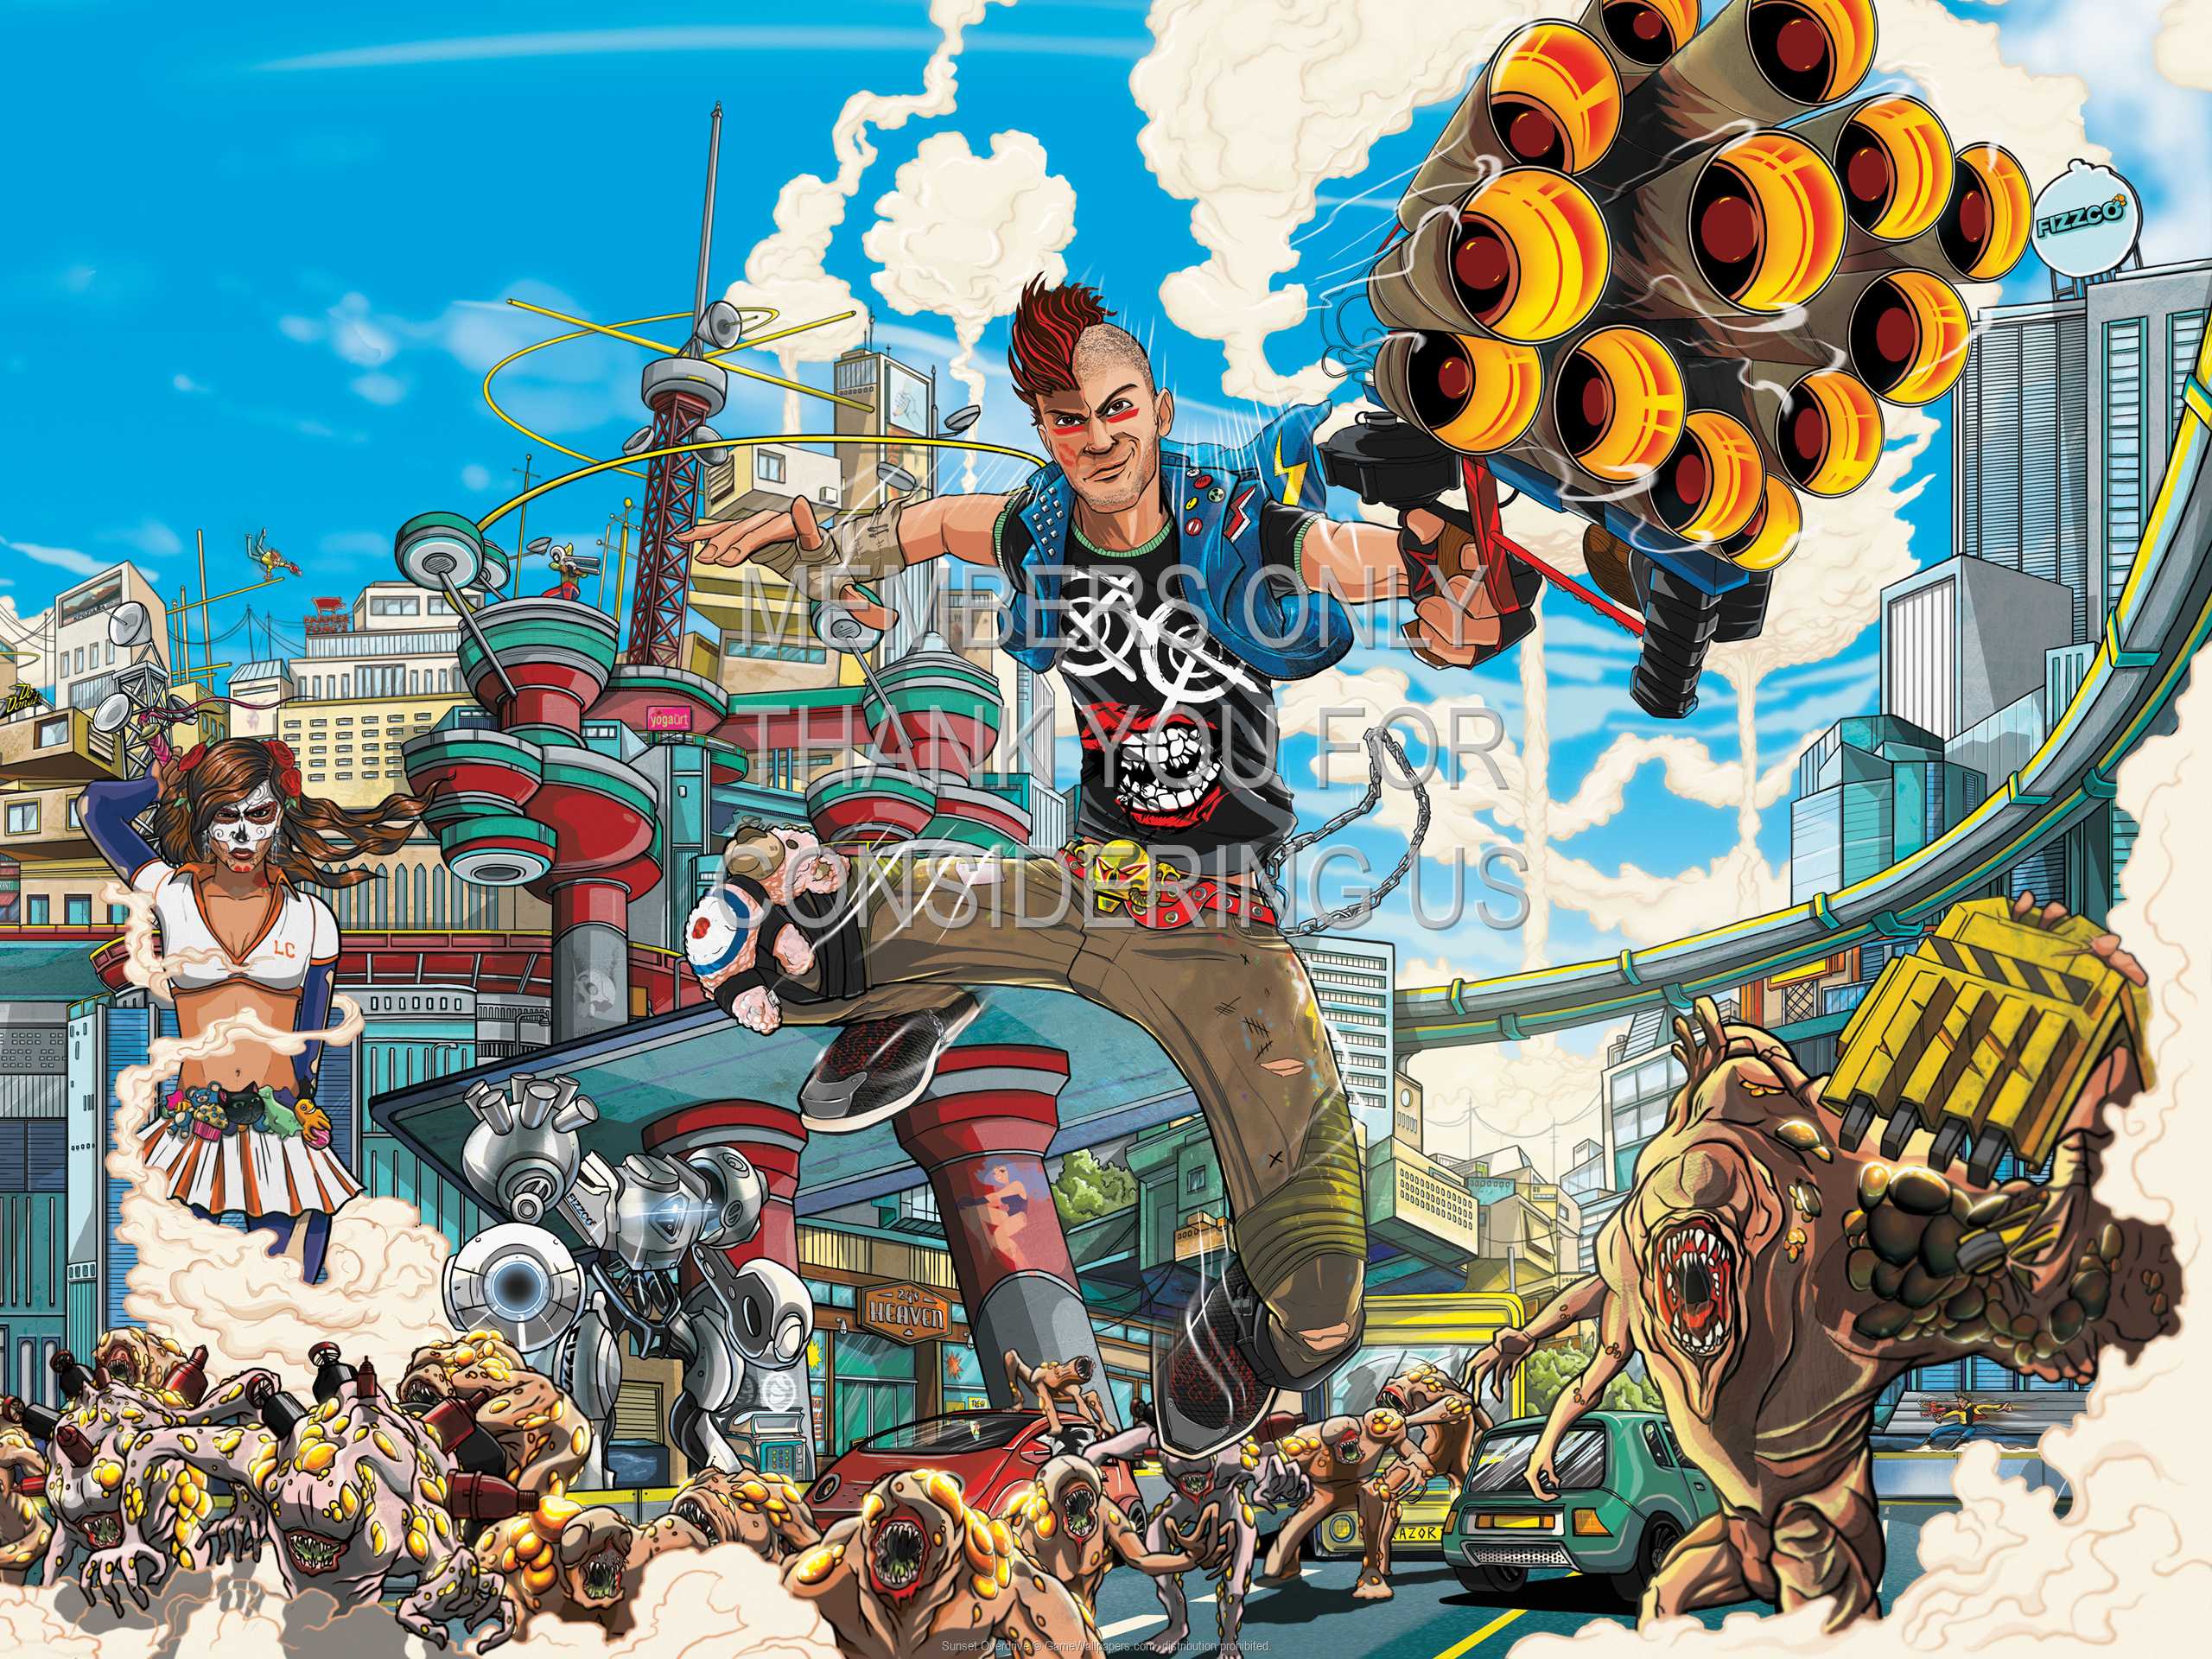 Sunset Overdrive 1080p%20Horizontal Mobile wallpaper or background 01